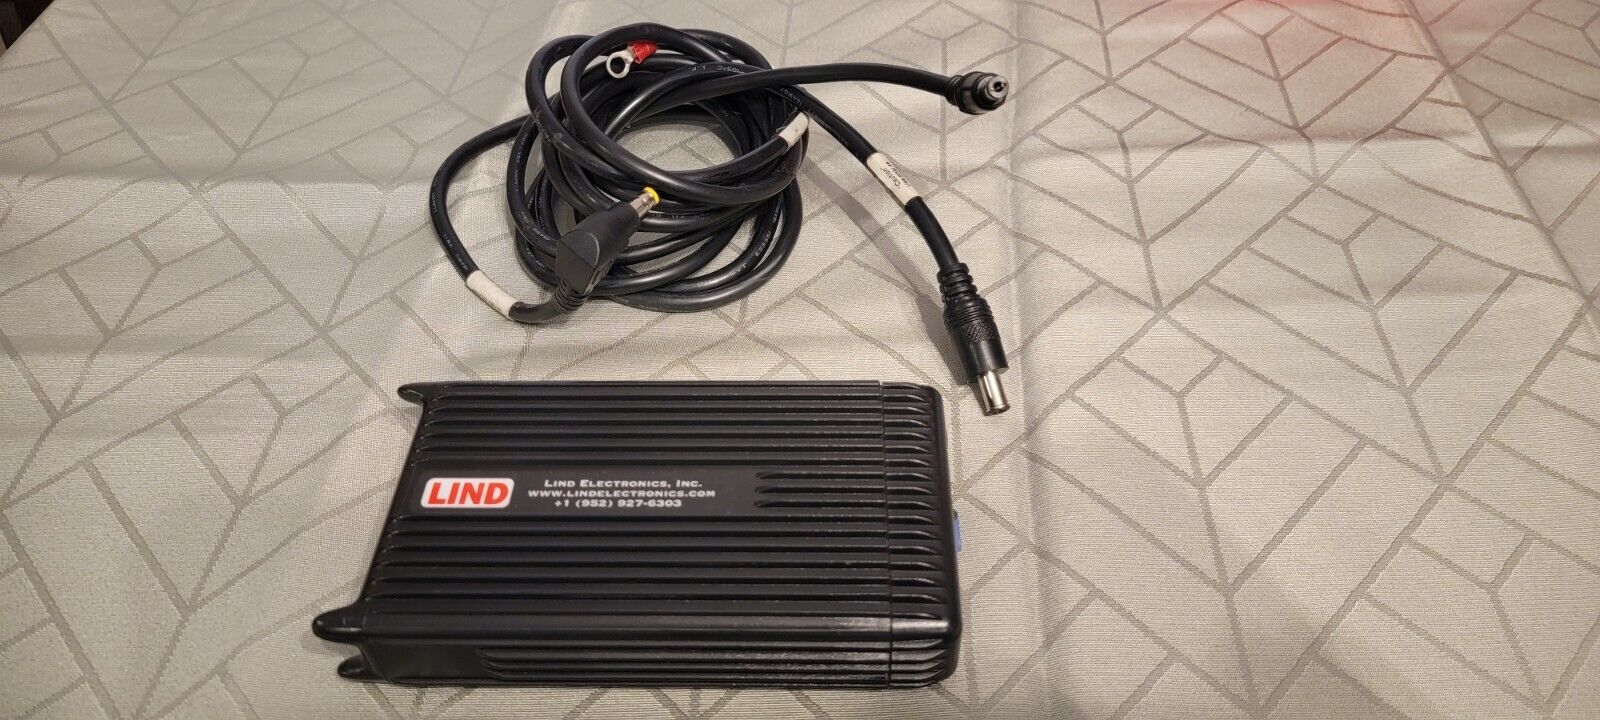 Genuine LIND CF-LNDDC120 Panasonic Toughbook Vehicle Car Adapter With Cords